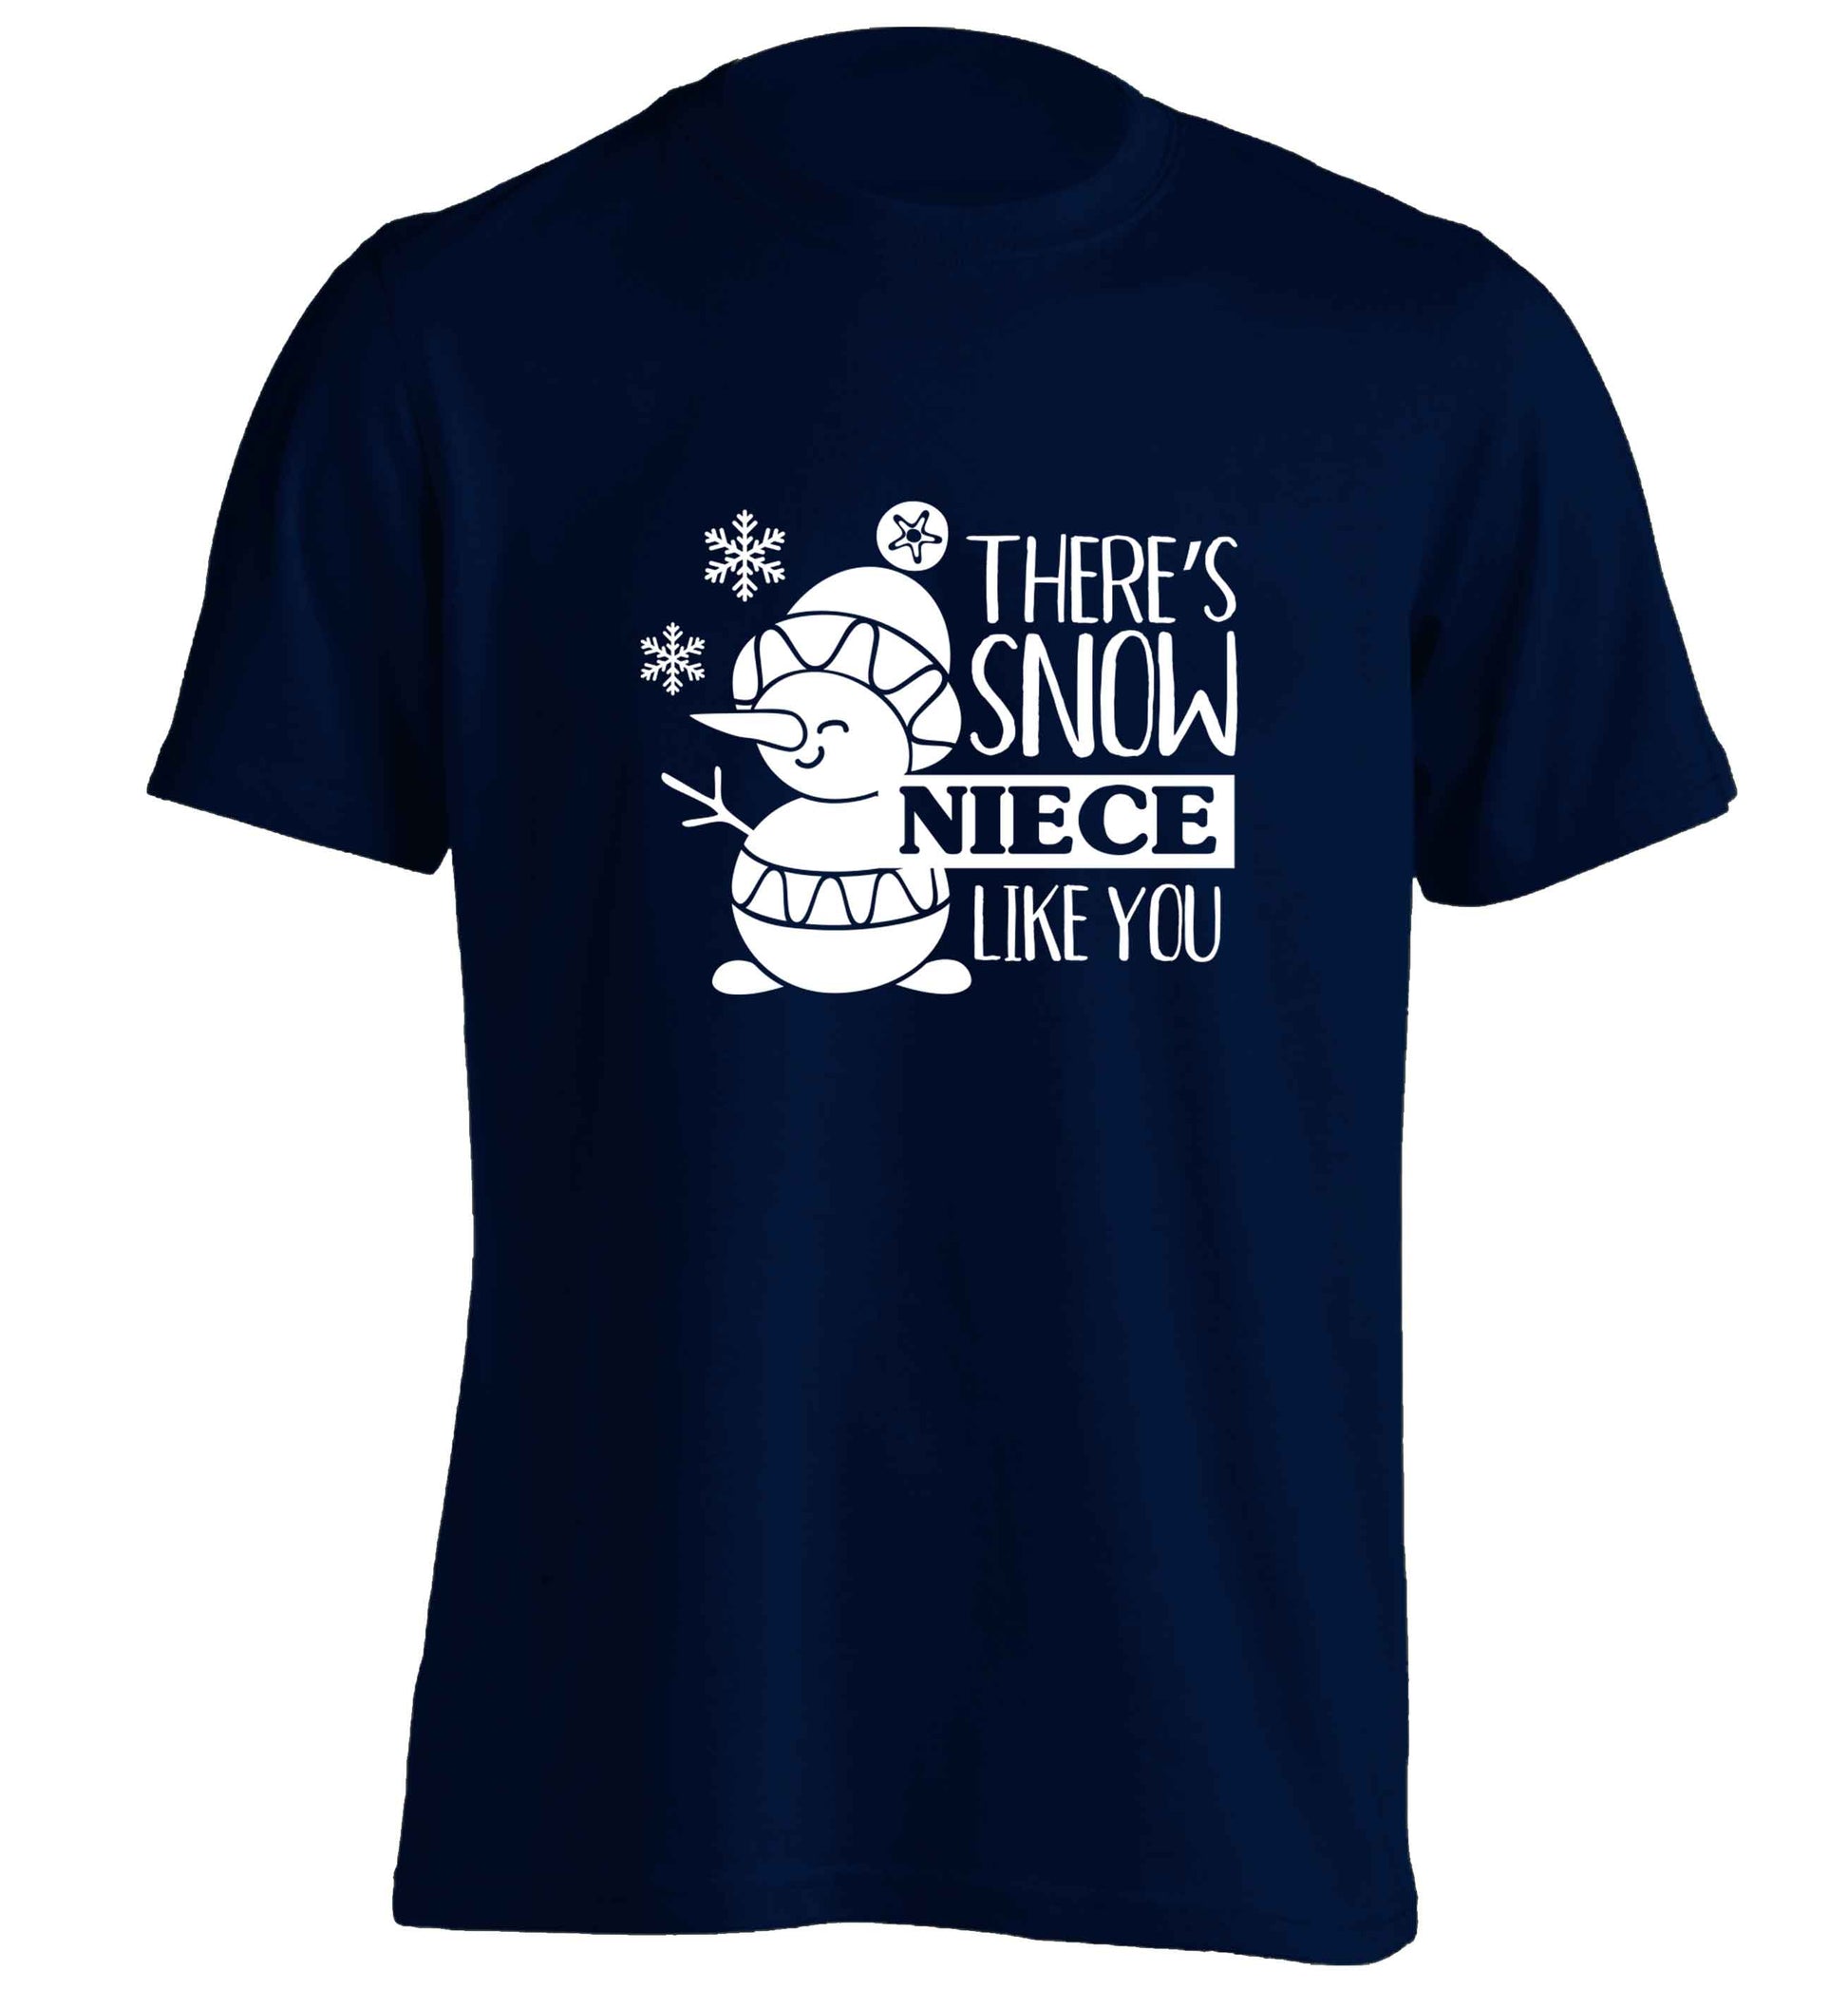 There's snow niece like you adults unisex navy Tshirt 2XL